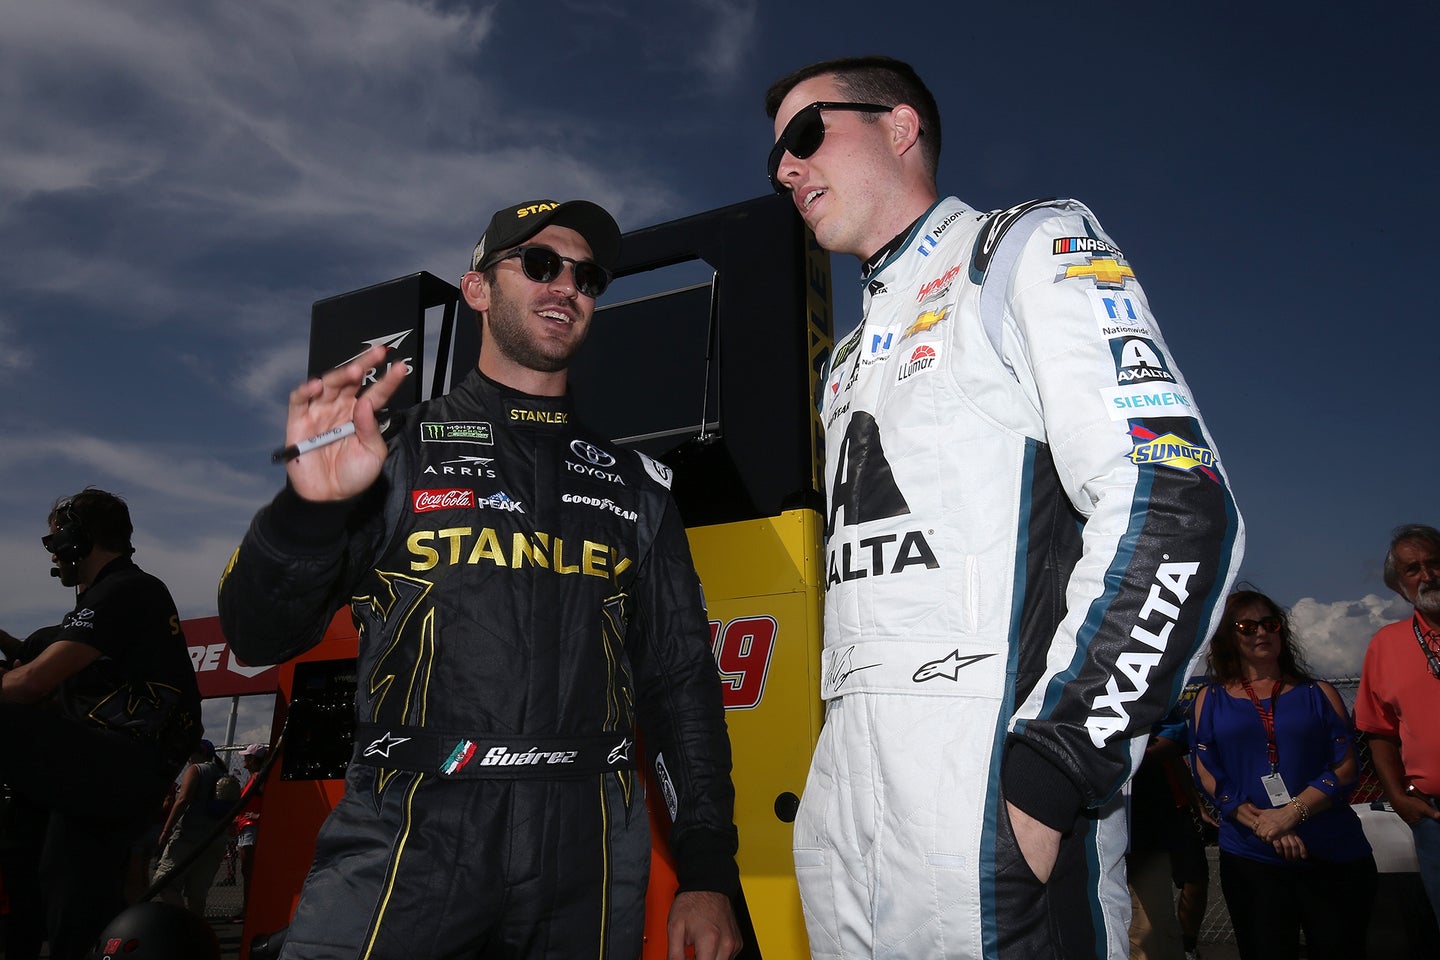 Preview: The Gander Outdoors 400 NASCAR Cup Series Race at Pocono